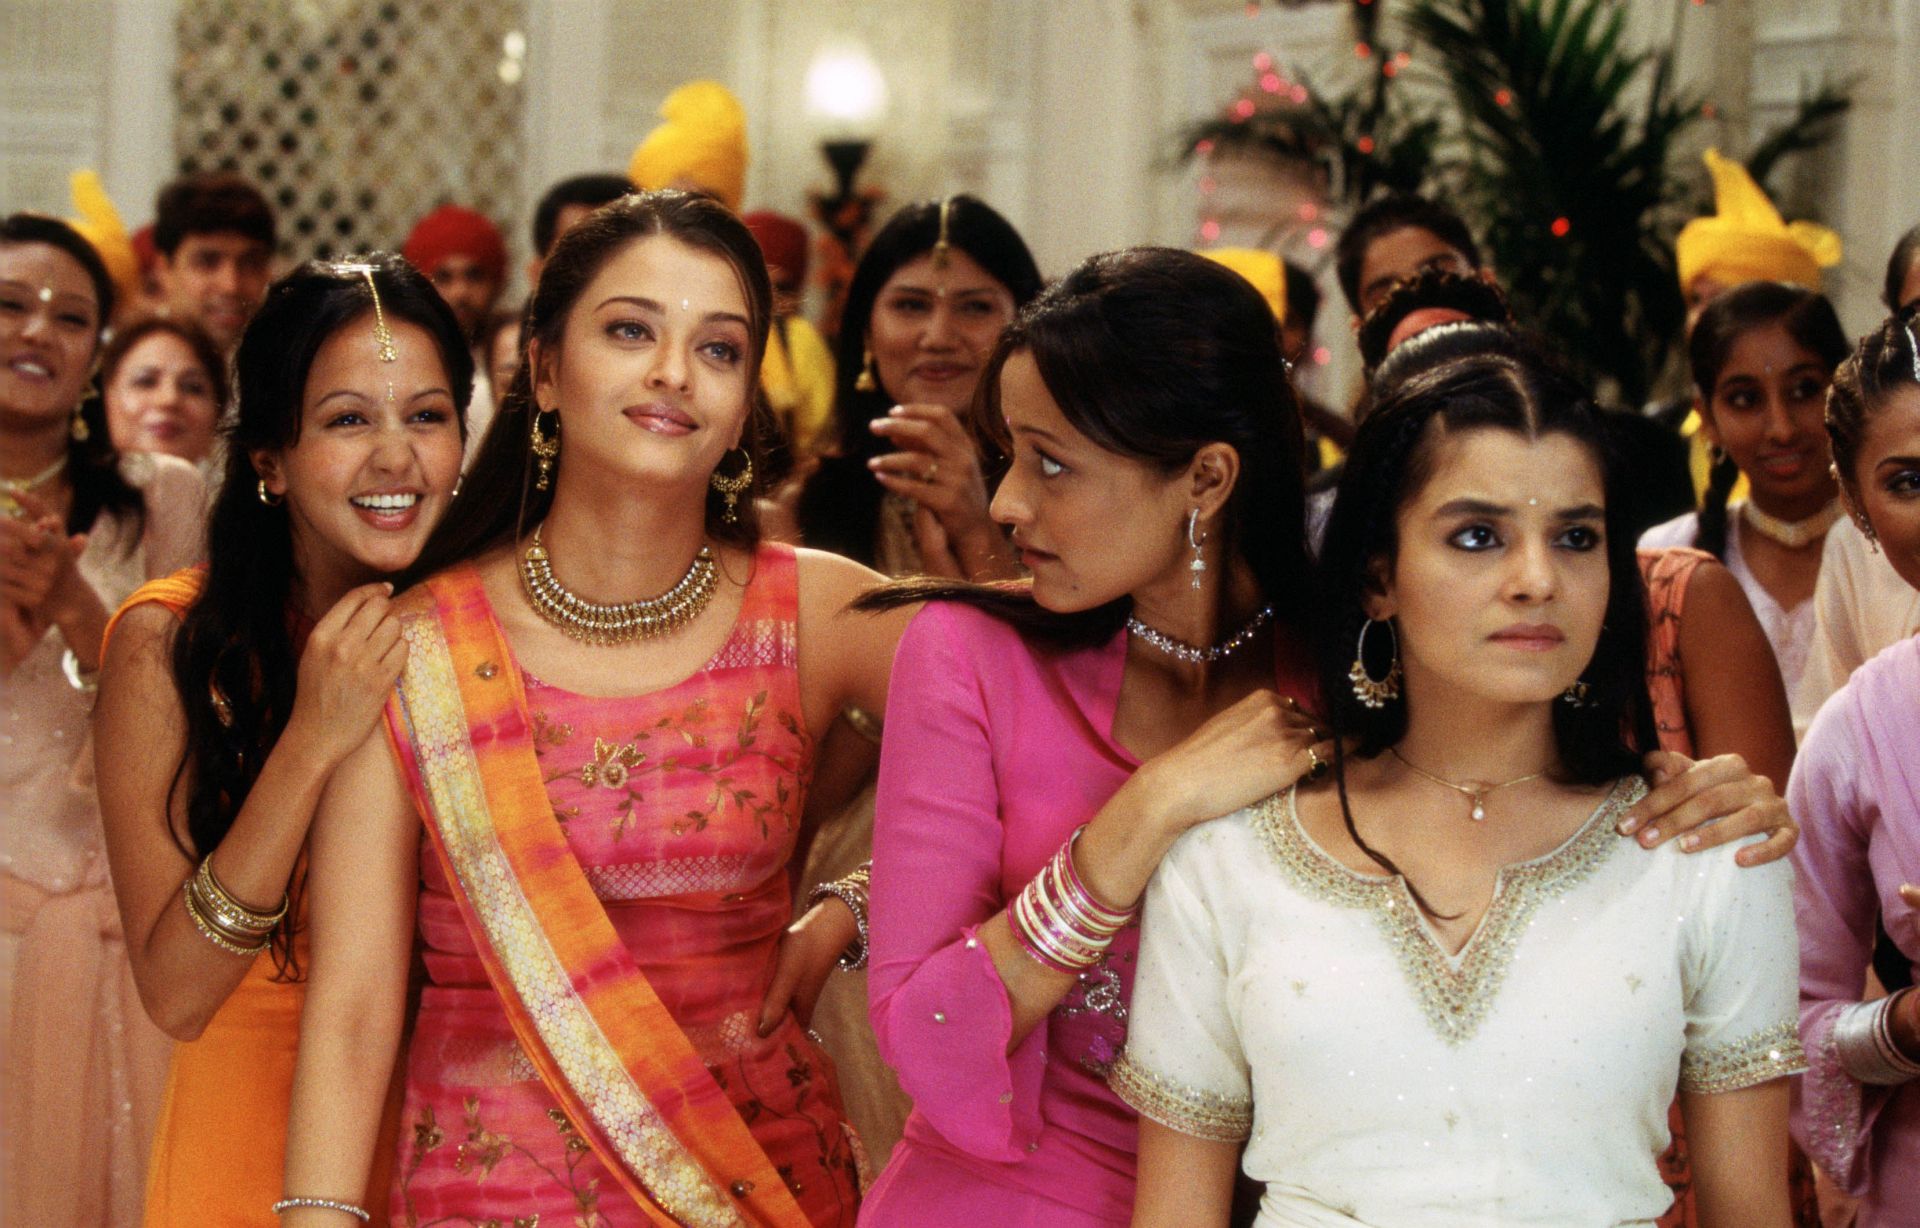 The Most Beautiful Fraud:  Bride and Prejudice